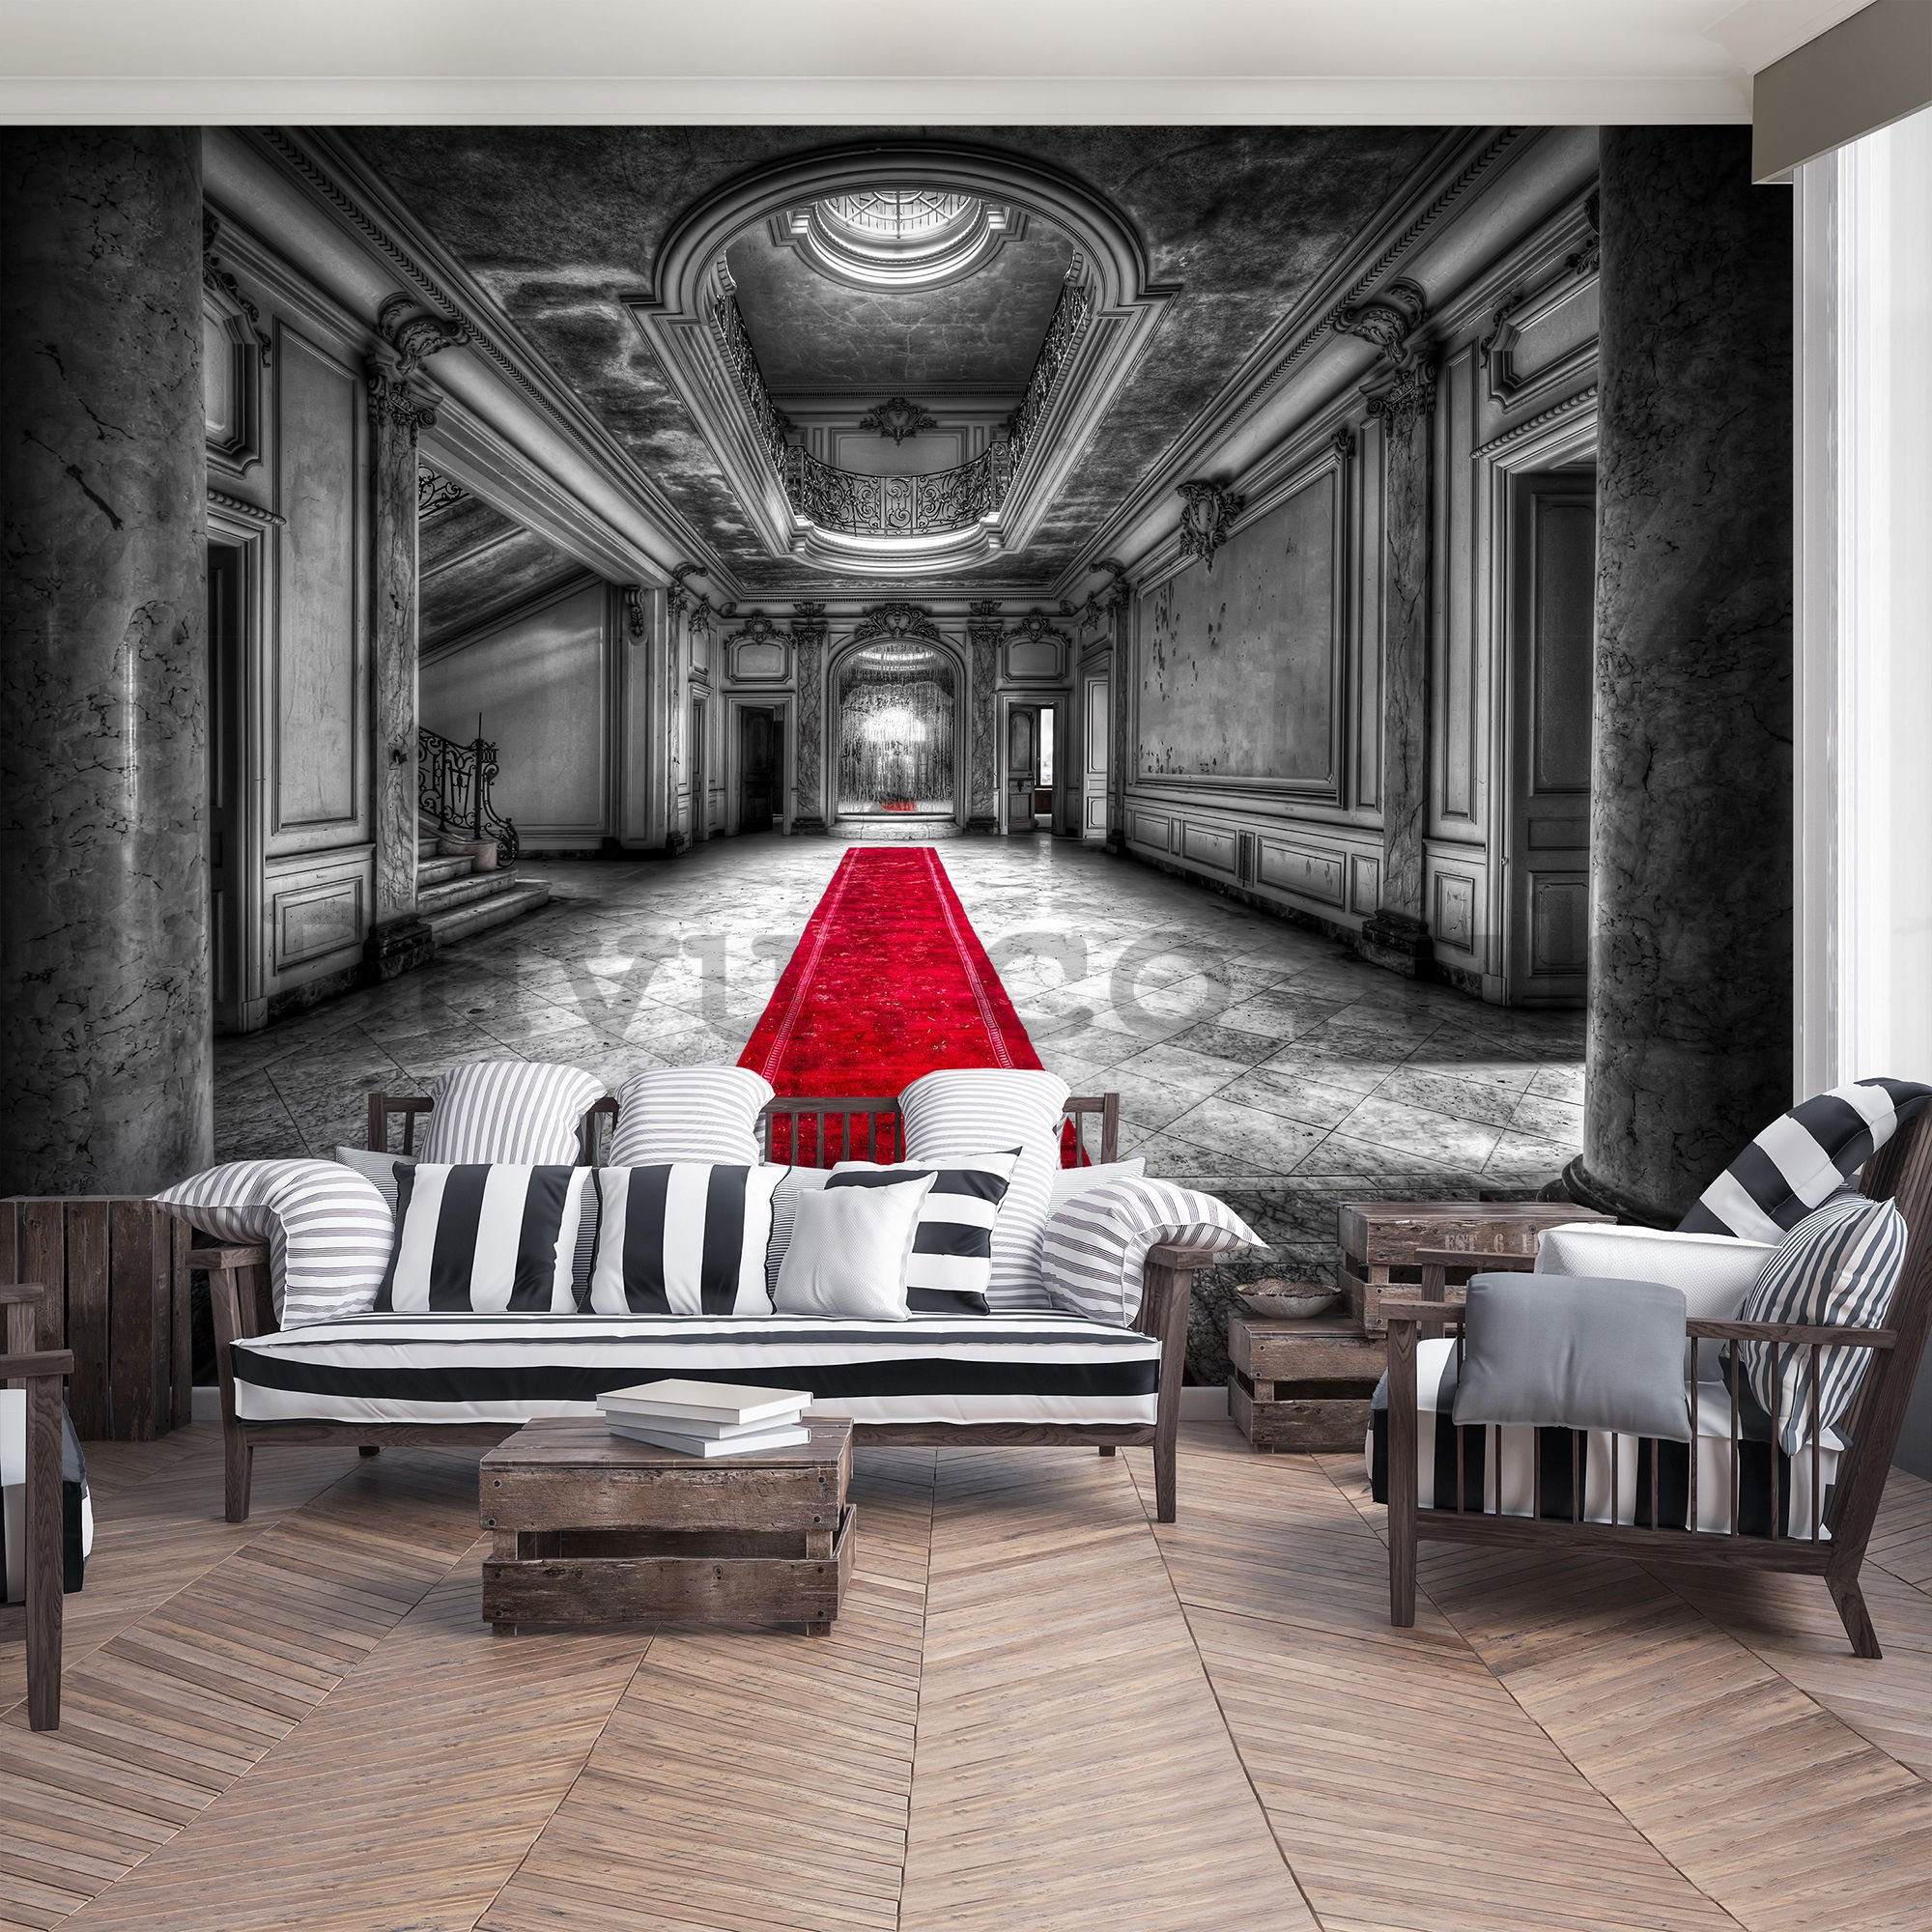 Wall mural vlies: Hallway at the castle - 416x254 cm